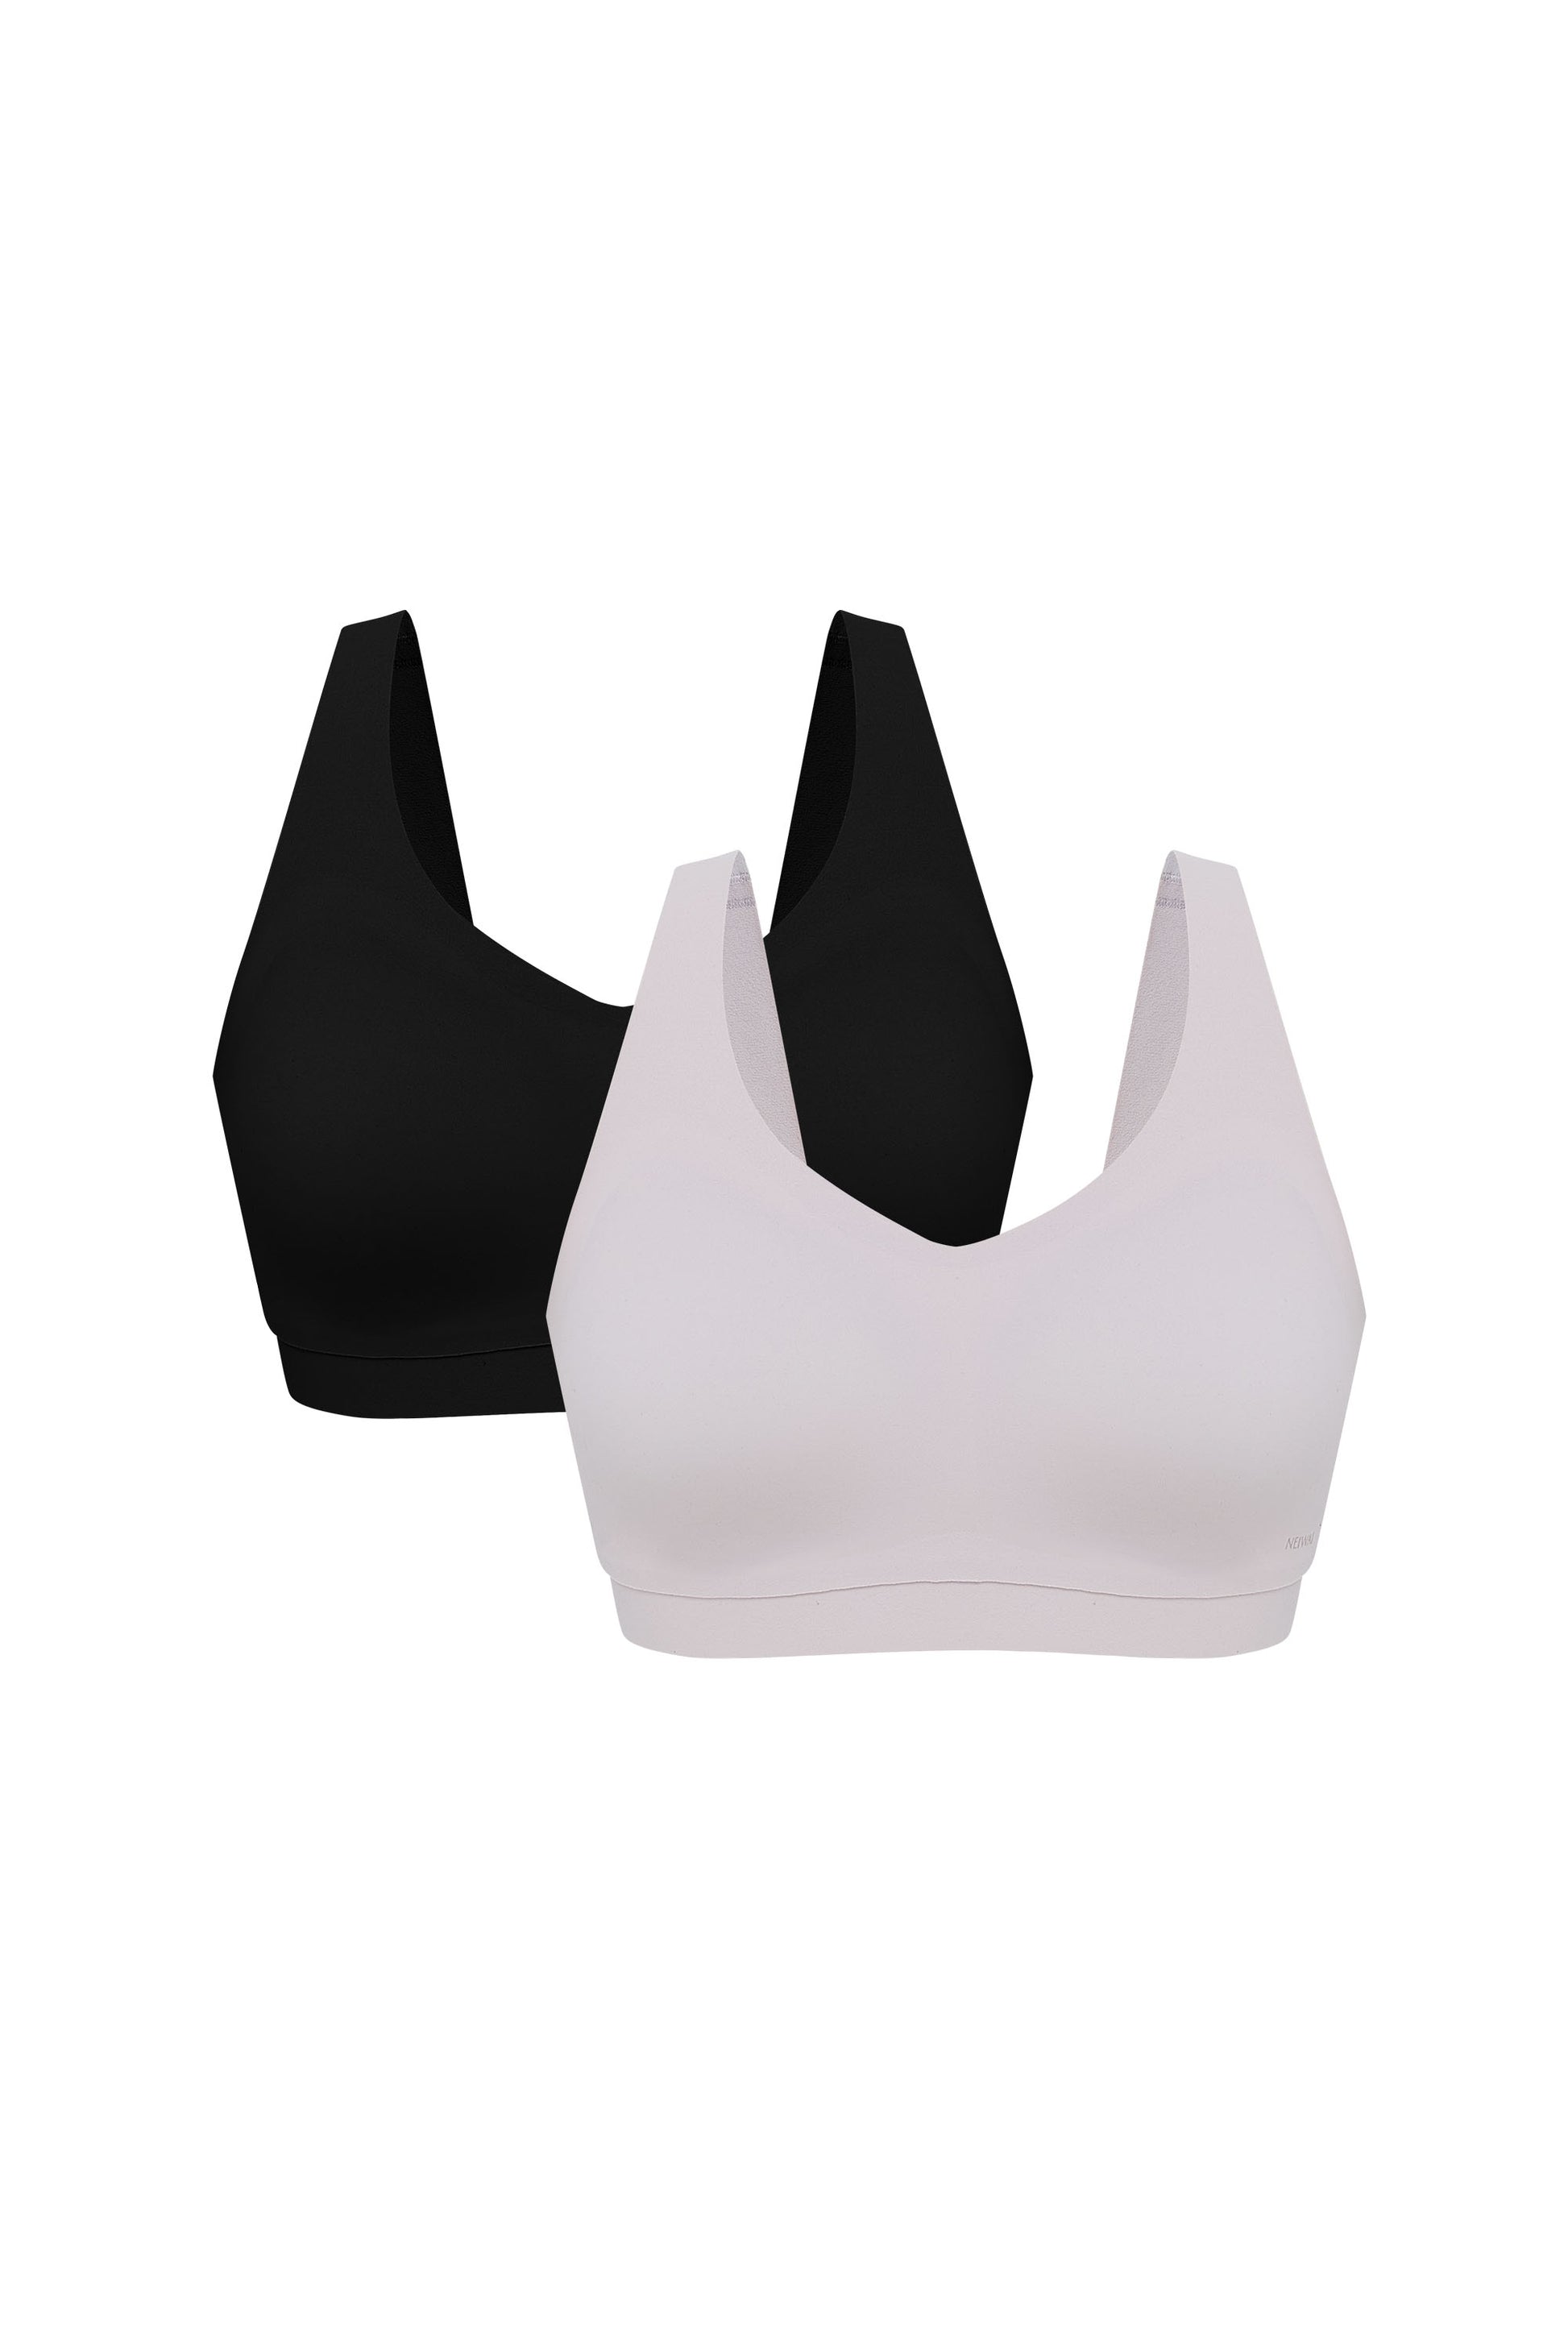 34dd Cup Size Top Sellers, SAVE 31% 